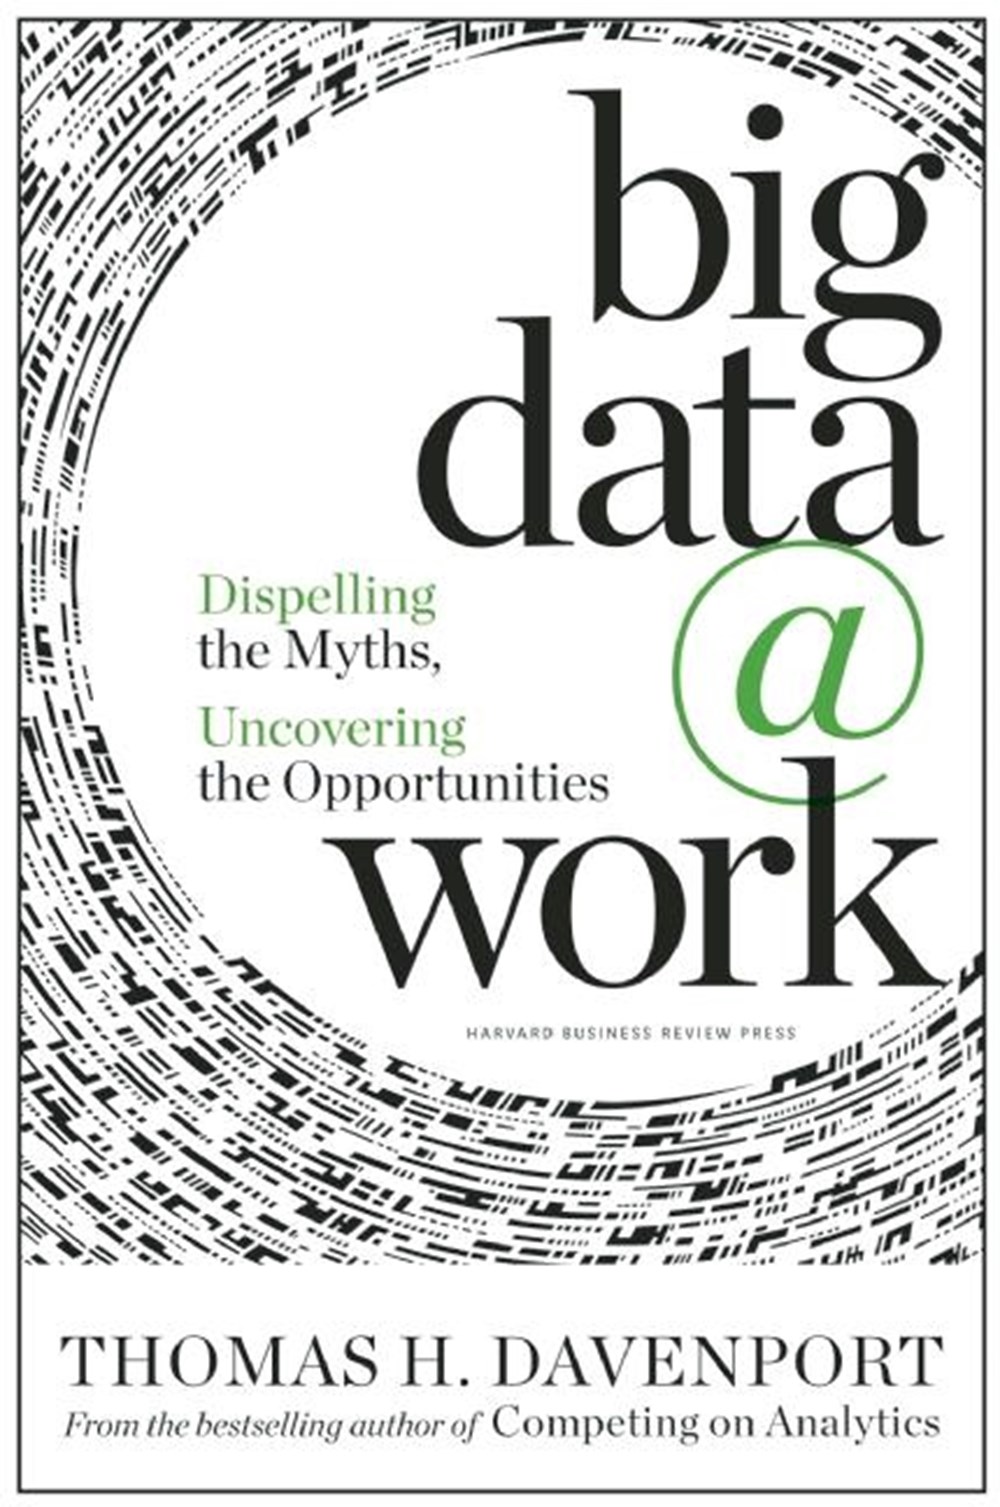 Big Data at Work Dispelling the Myths, Uncovering the Opportunities